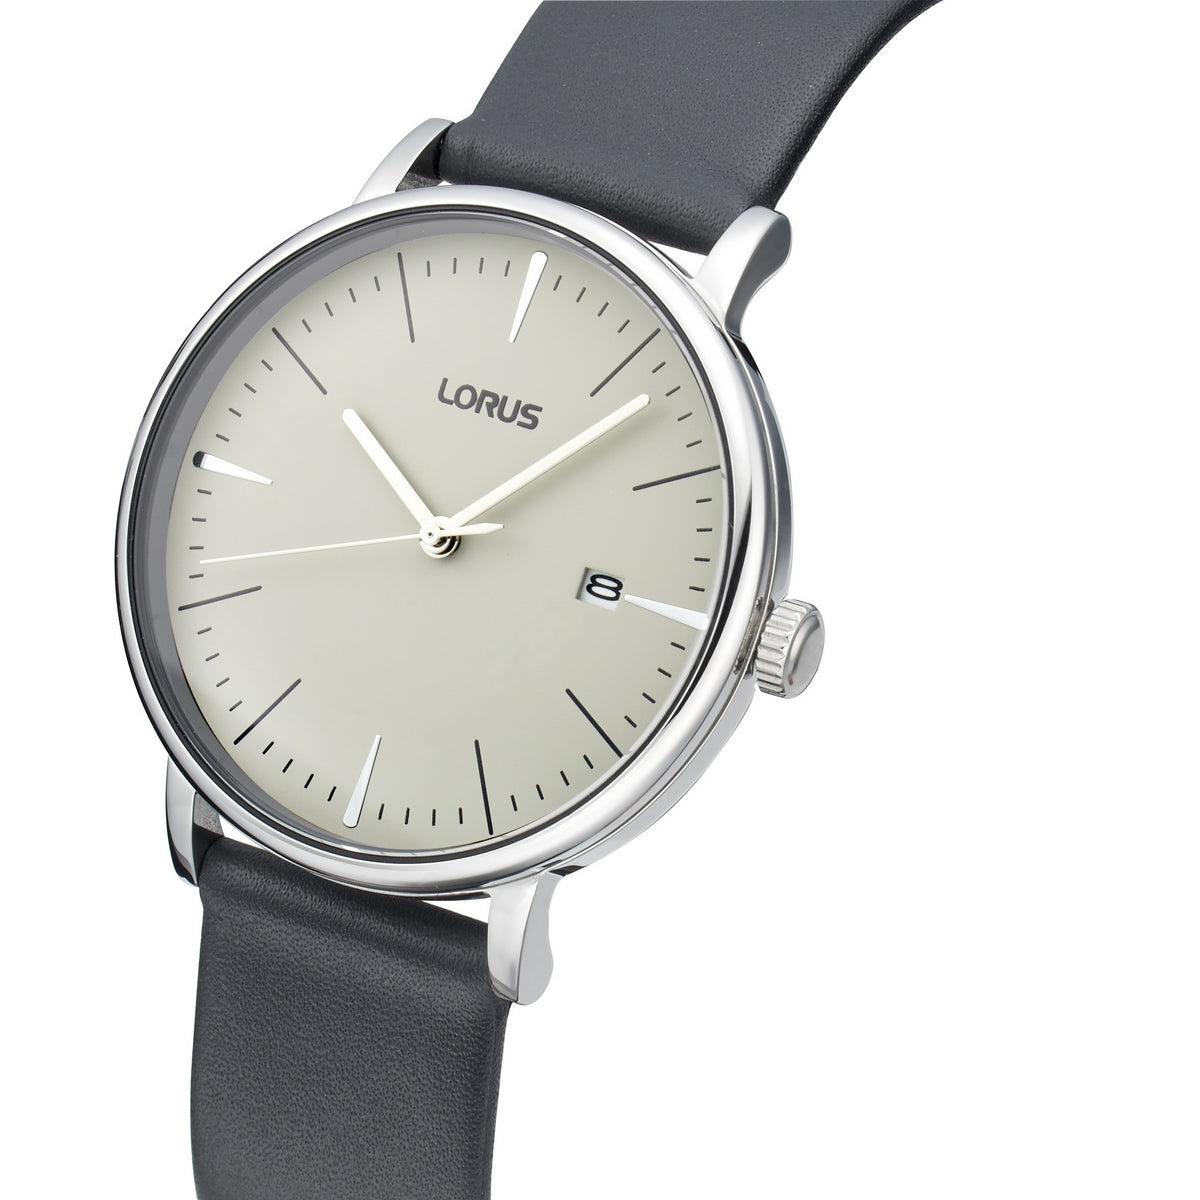 lorus stainless - Jewellers watch strap steel quartz gents dial grey Moores